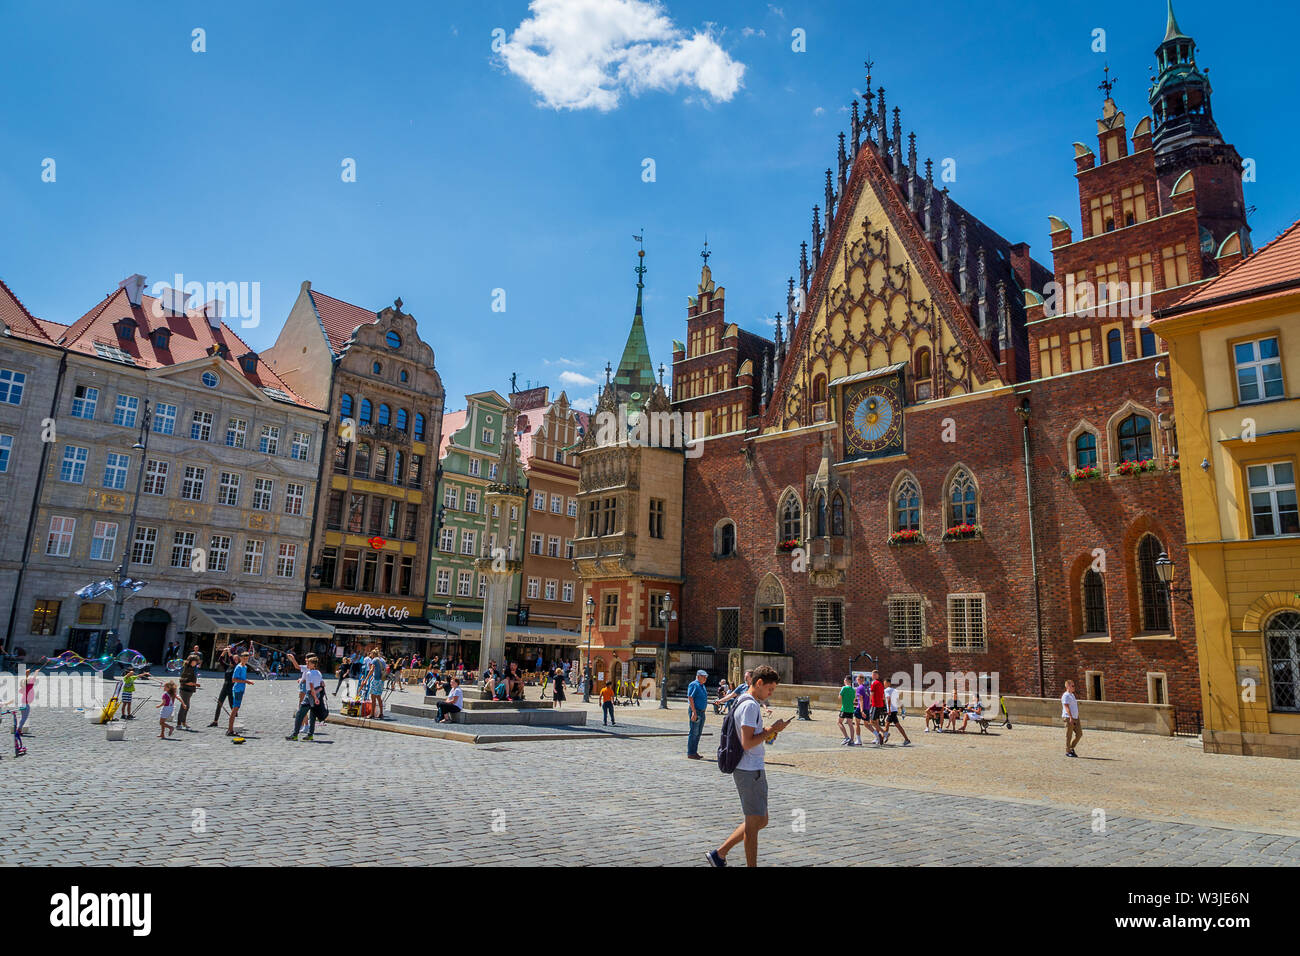 Wroclaw, Poland - July 2019:  The main market square in the old town of Wroclaw, Poland. Wroclaw square is one of the largest markets in Europe. Stock Photo